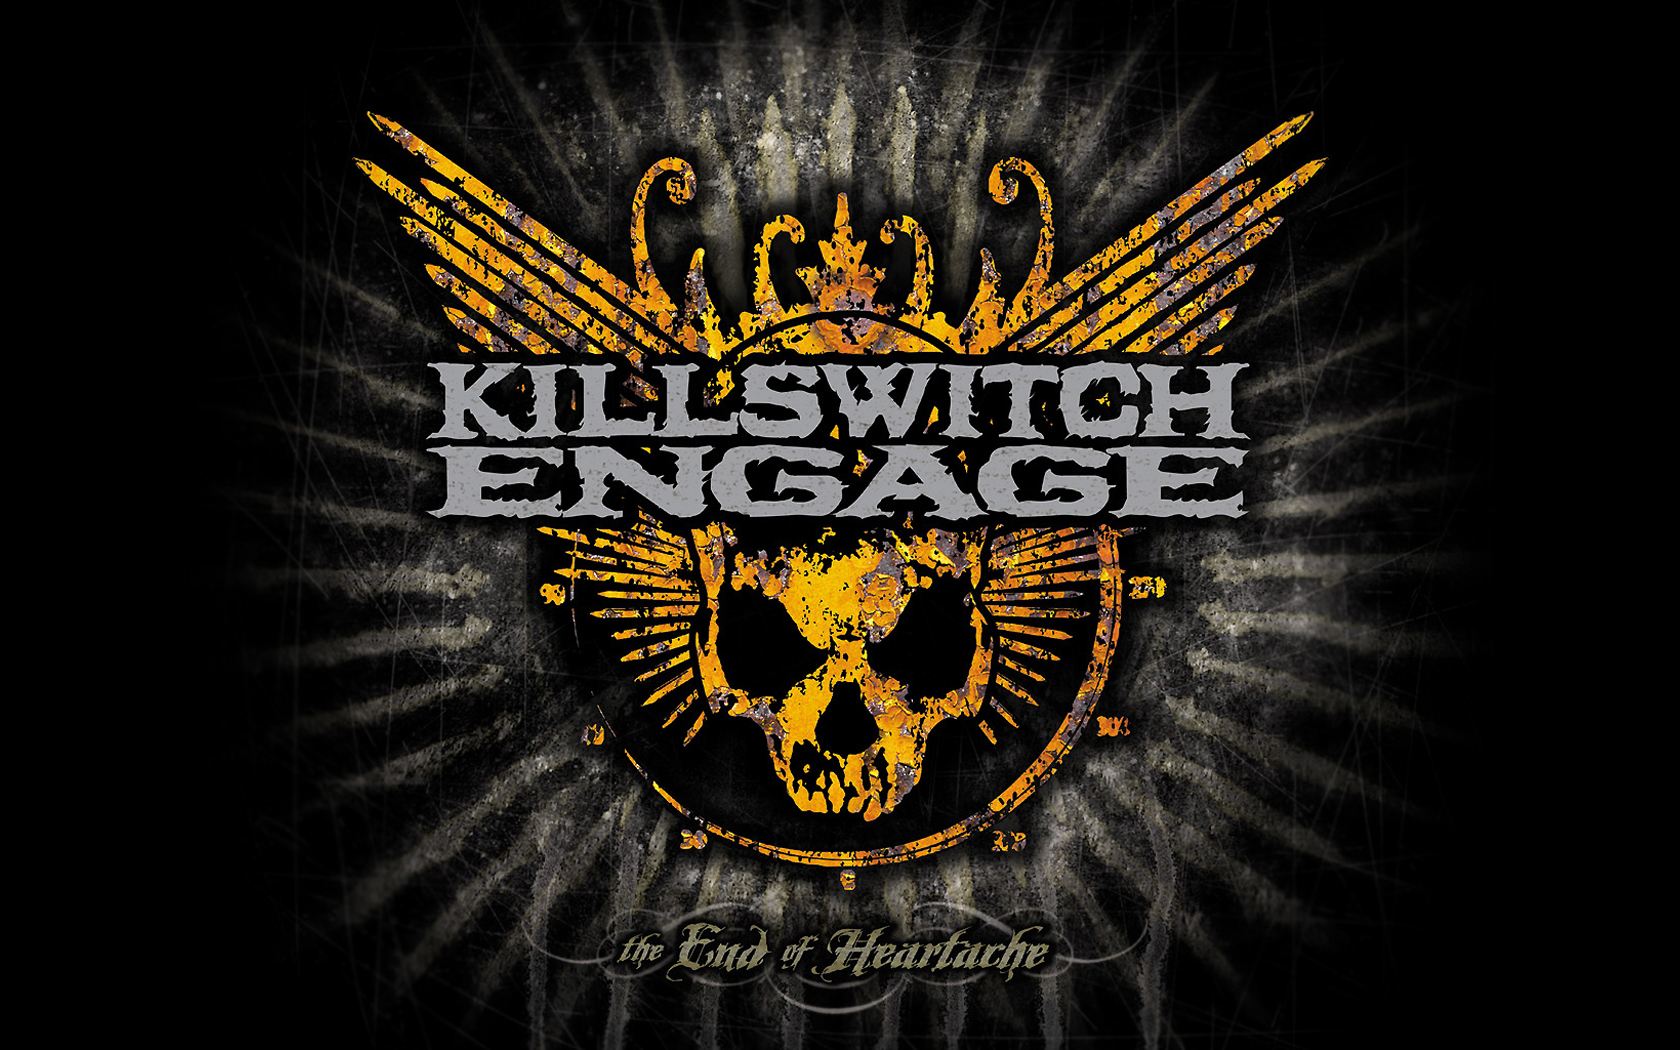 Killswitch Engage Wallpaper 1080p Urn951d 4usky